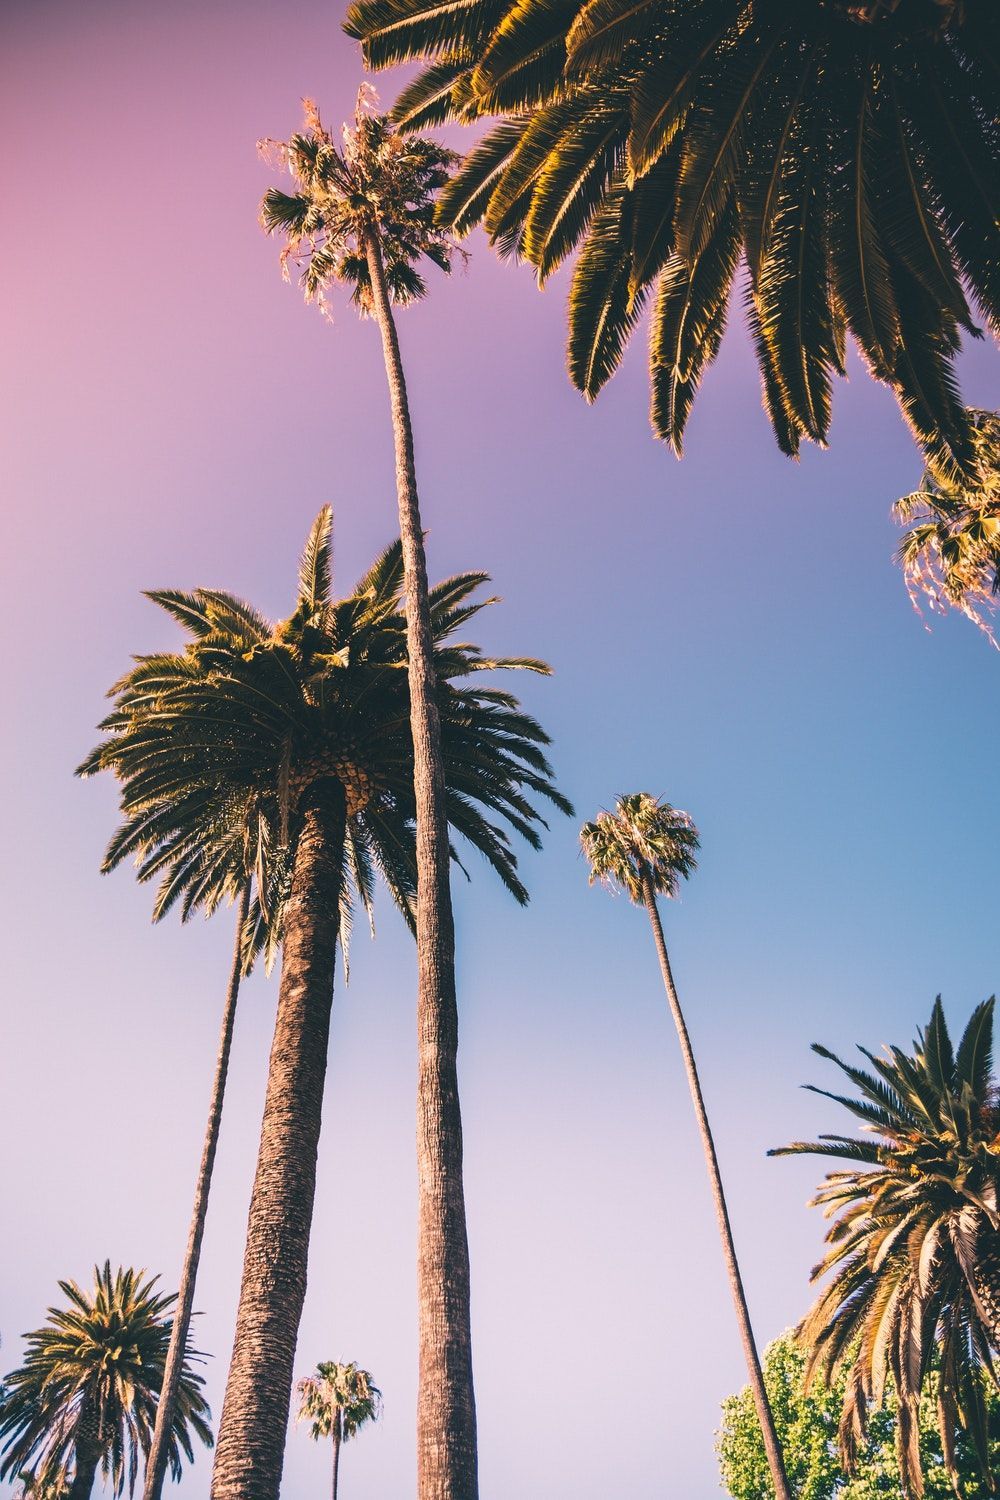 A group of palm trees in front of a blue sky - Palm tree